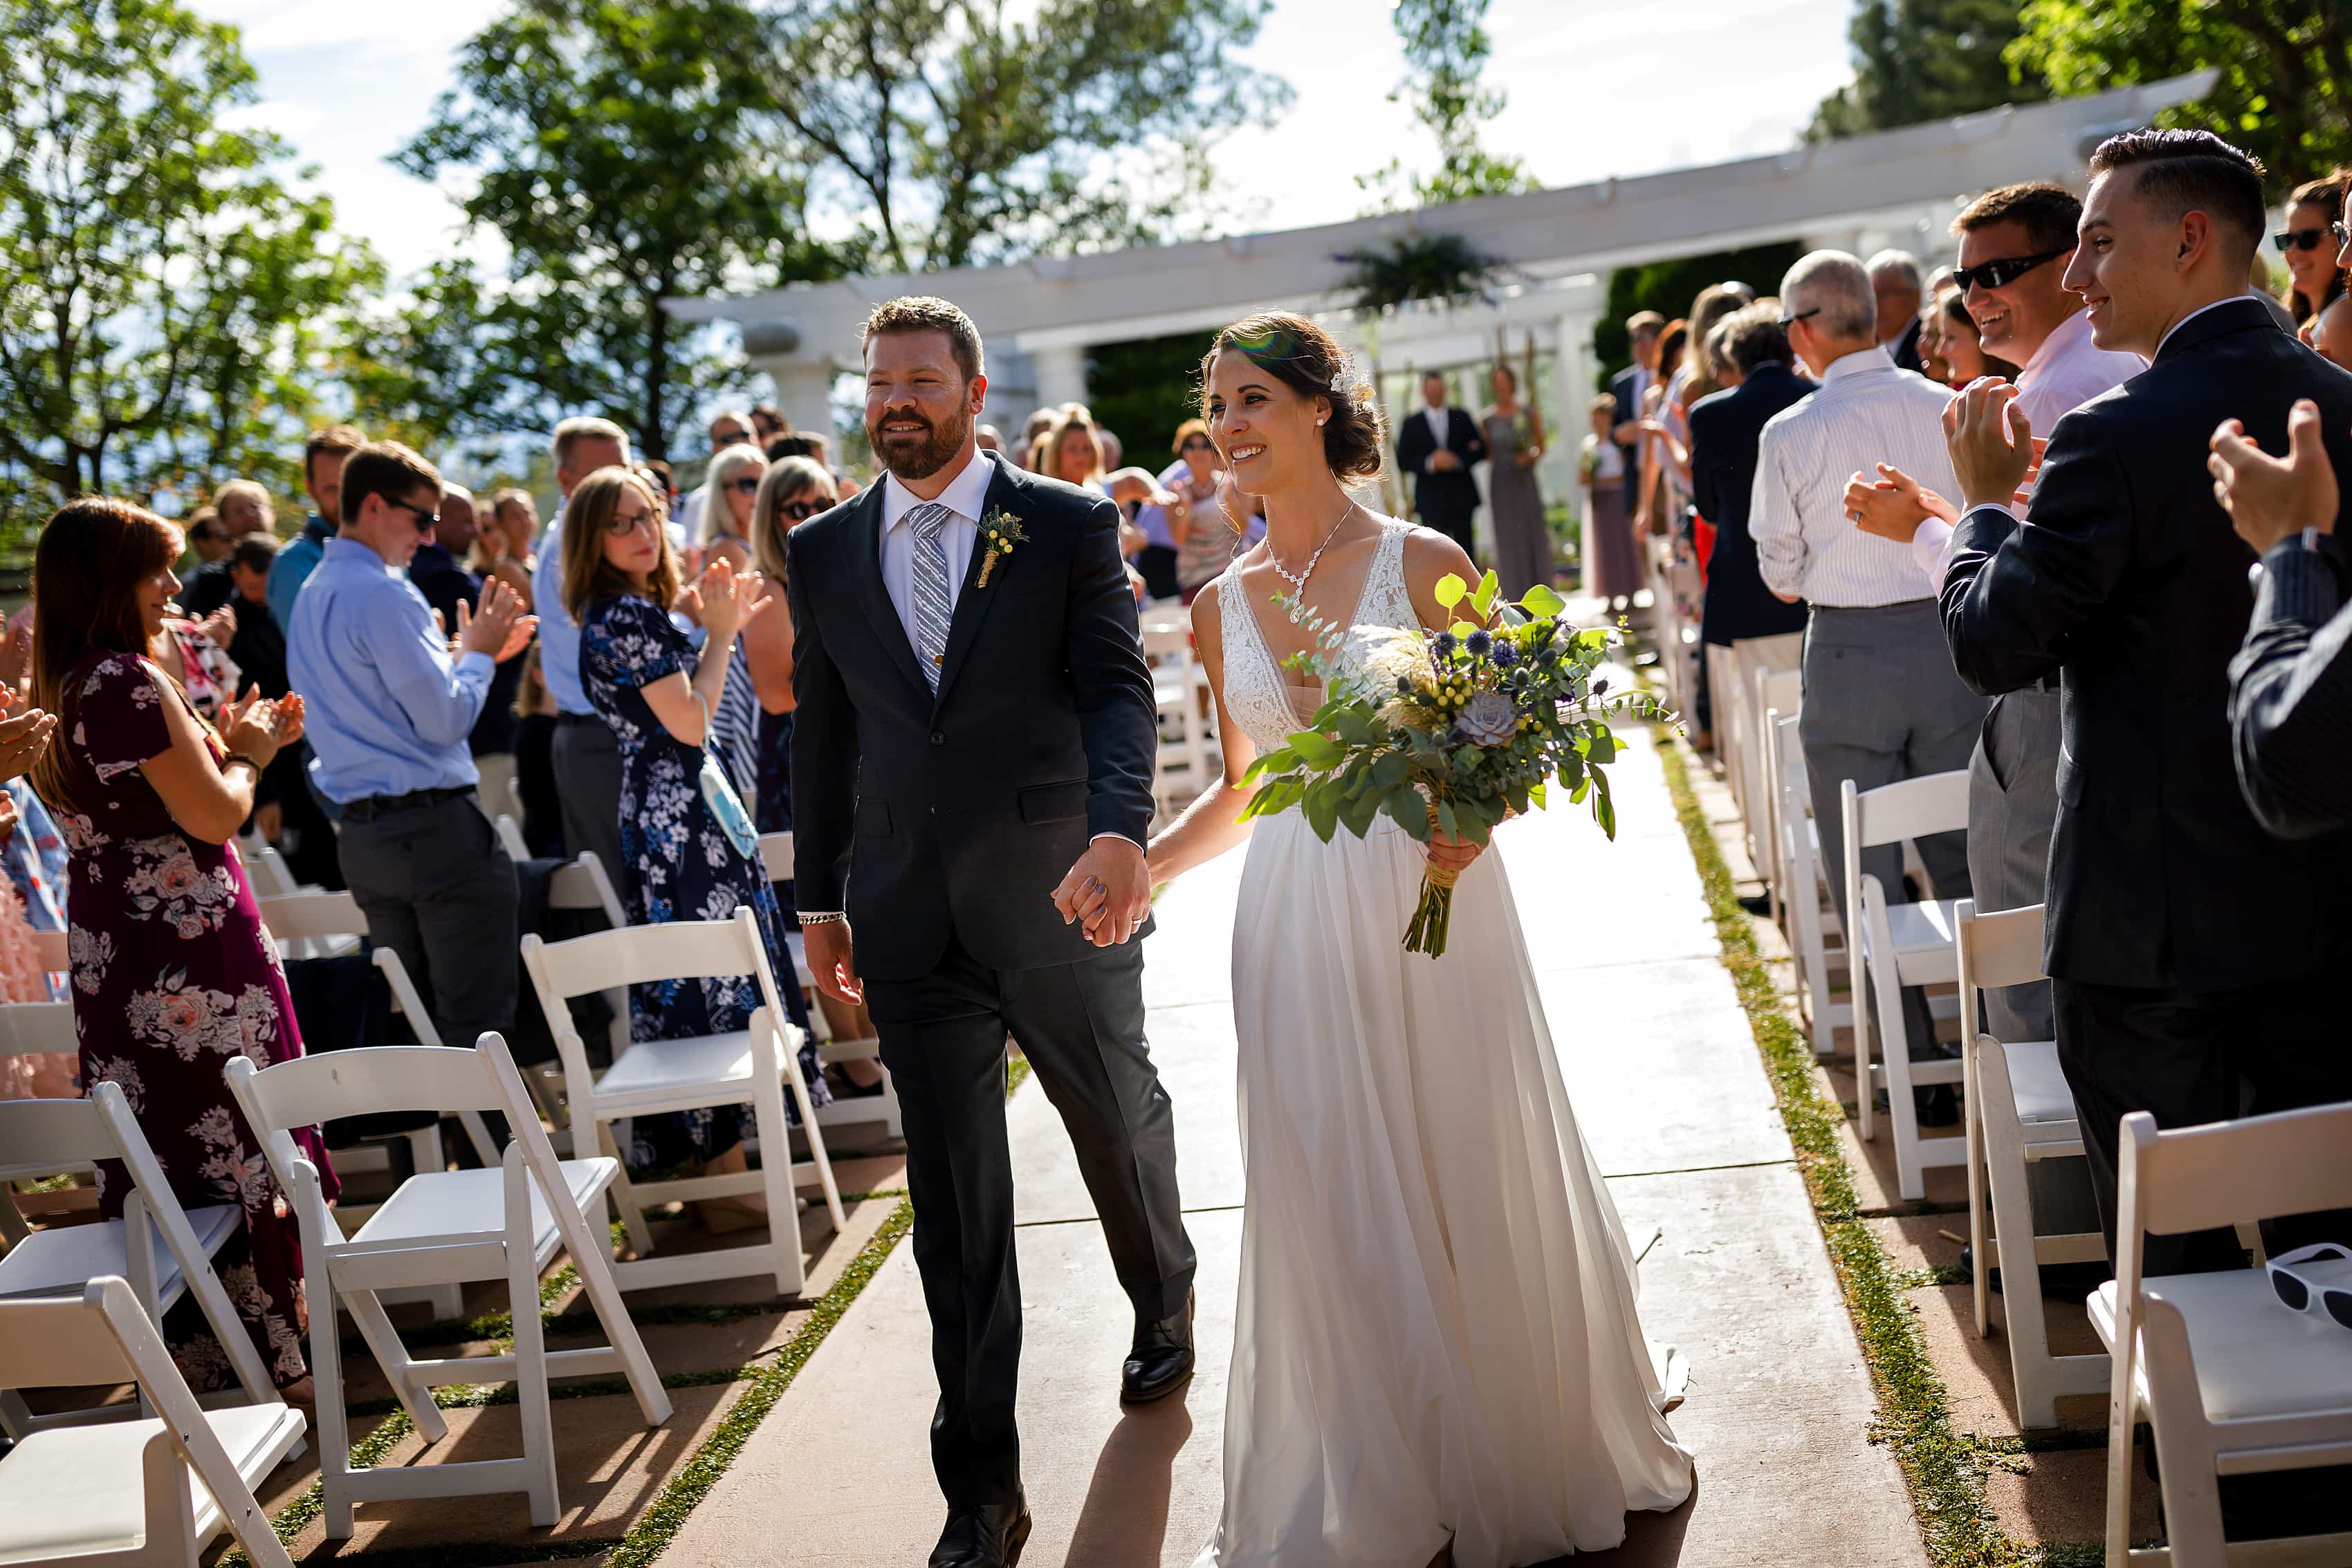 bride and groom walk back down the aisle after outdoor wedding ceremony at Lionsgate Event Center